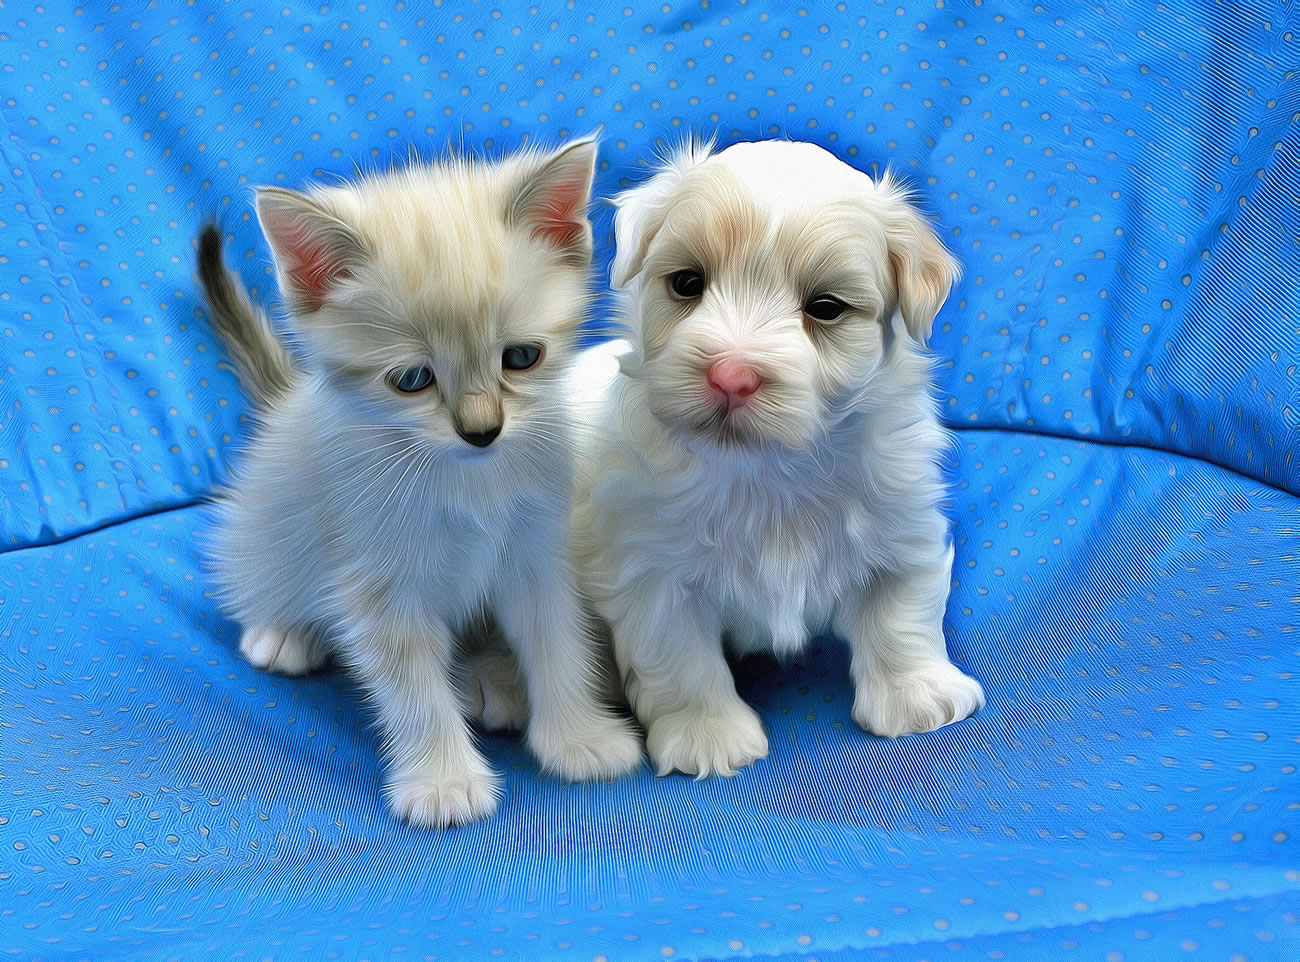 Picture of very cute kitten and puppy